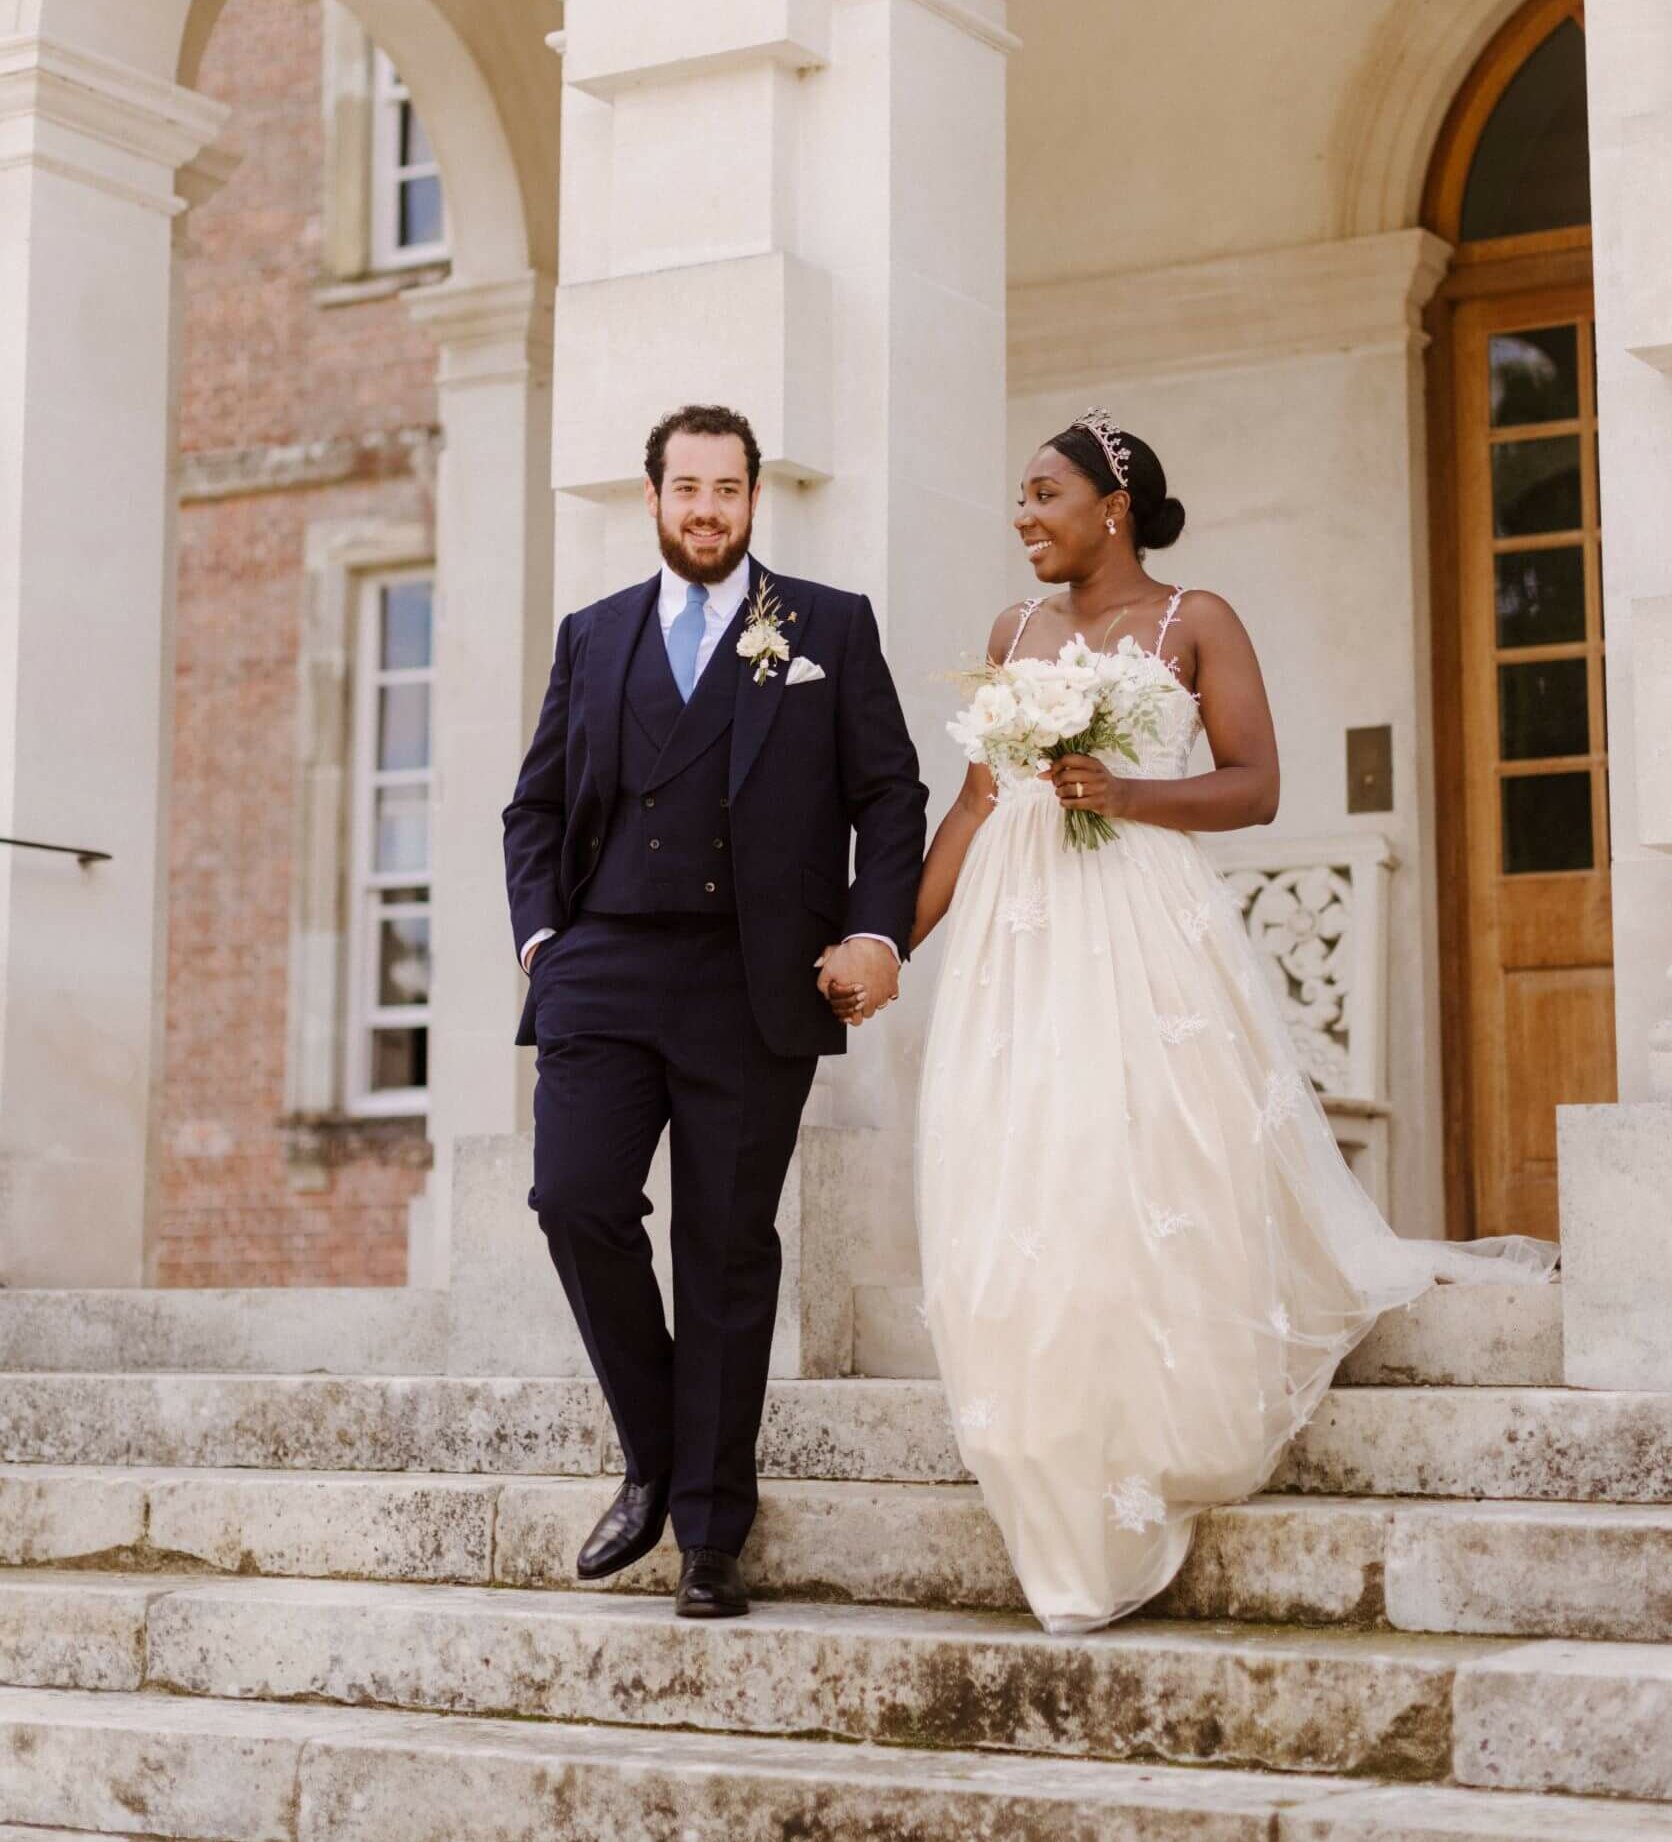 Newly married bride and groom hand in hand on the steps of their wedding venue